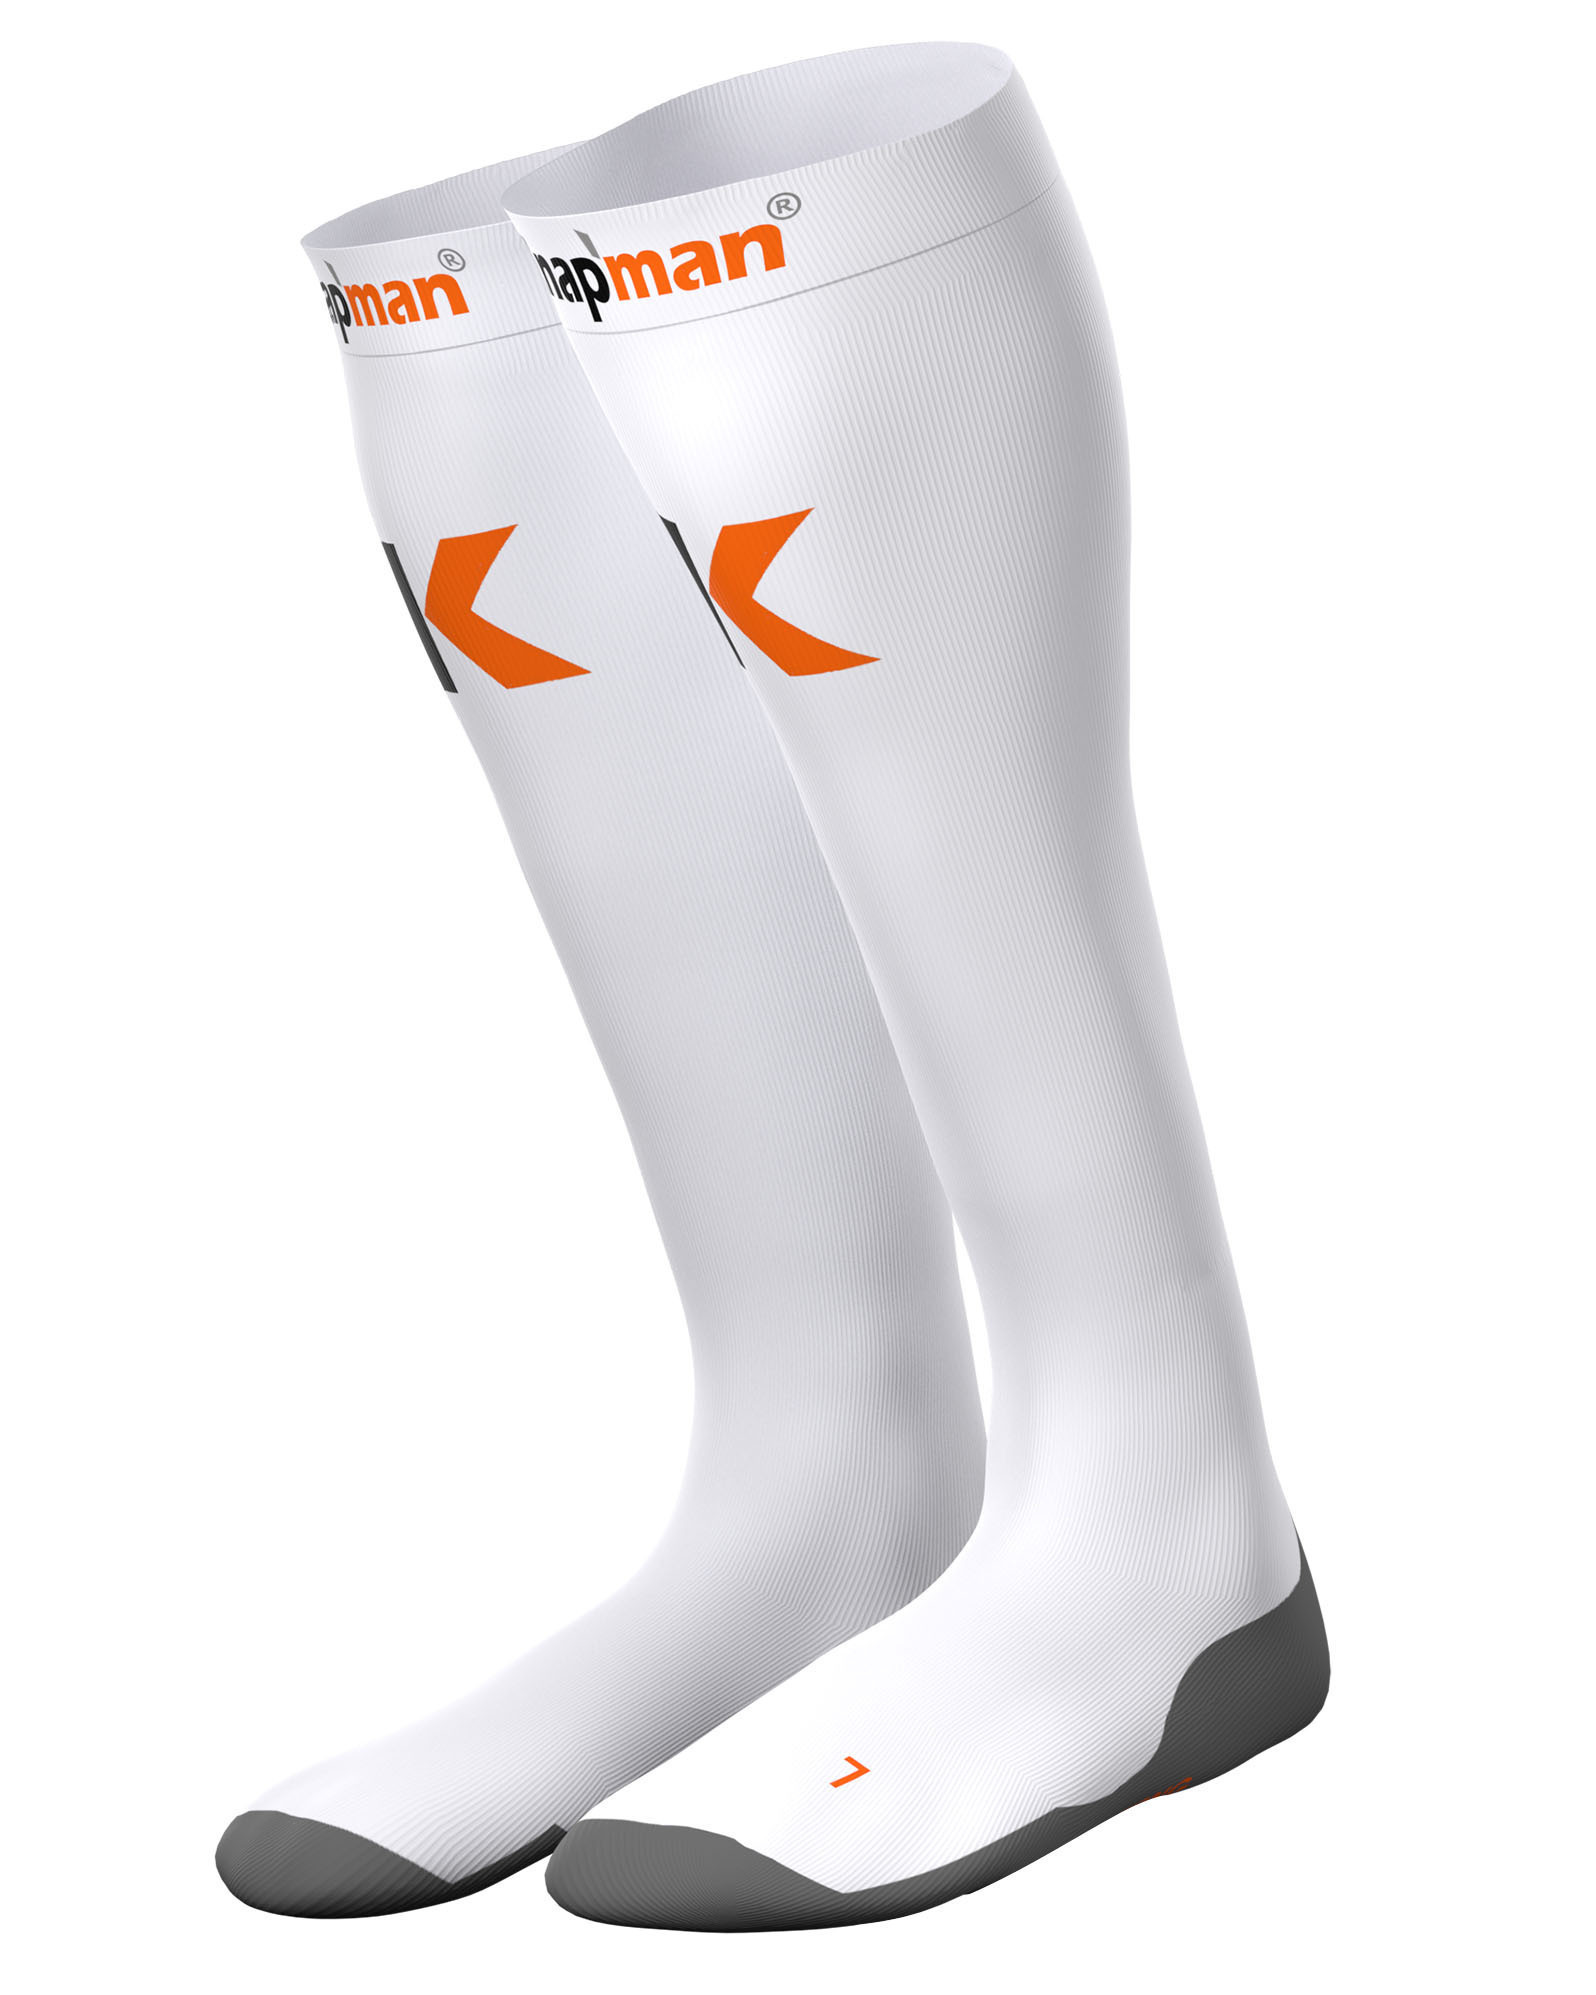 Knapman Womens Ultra Strong Compression Socks White